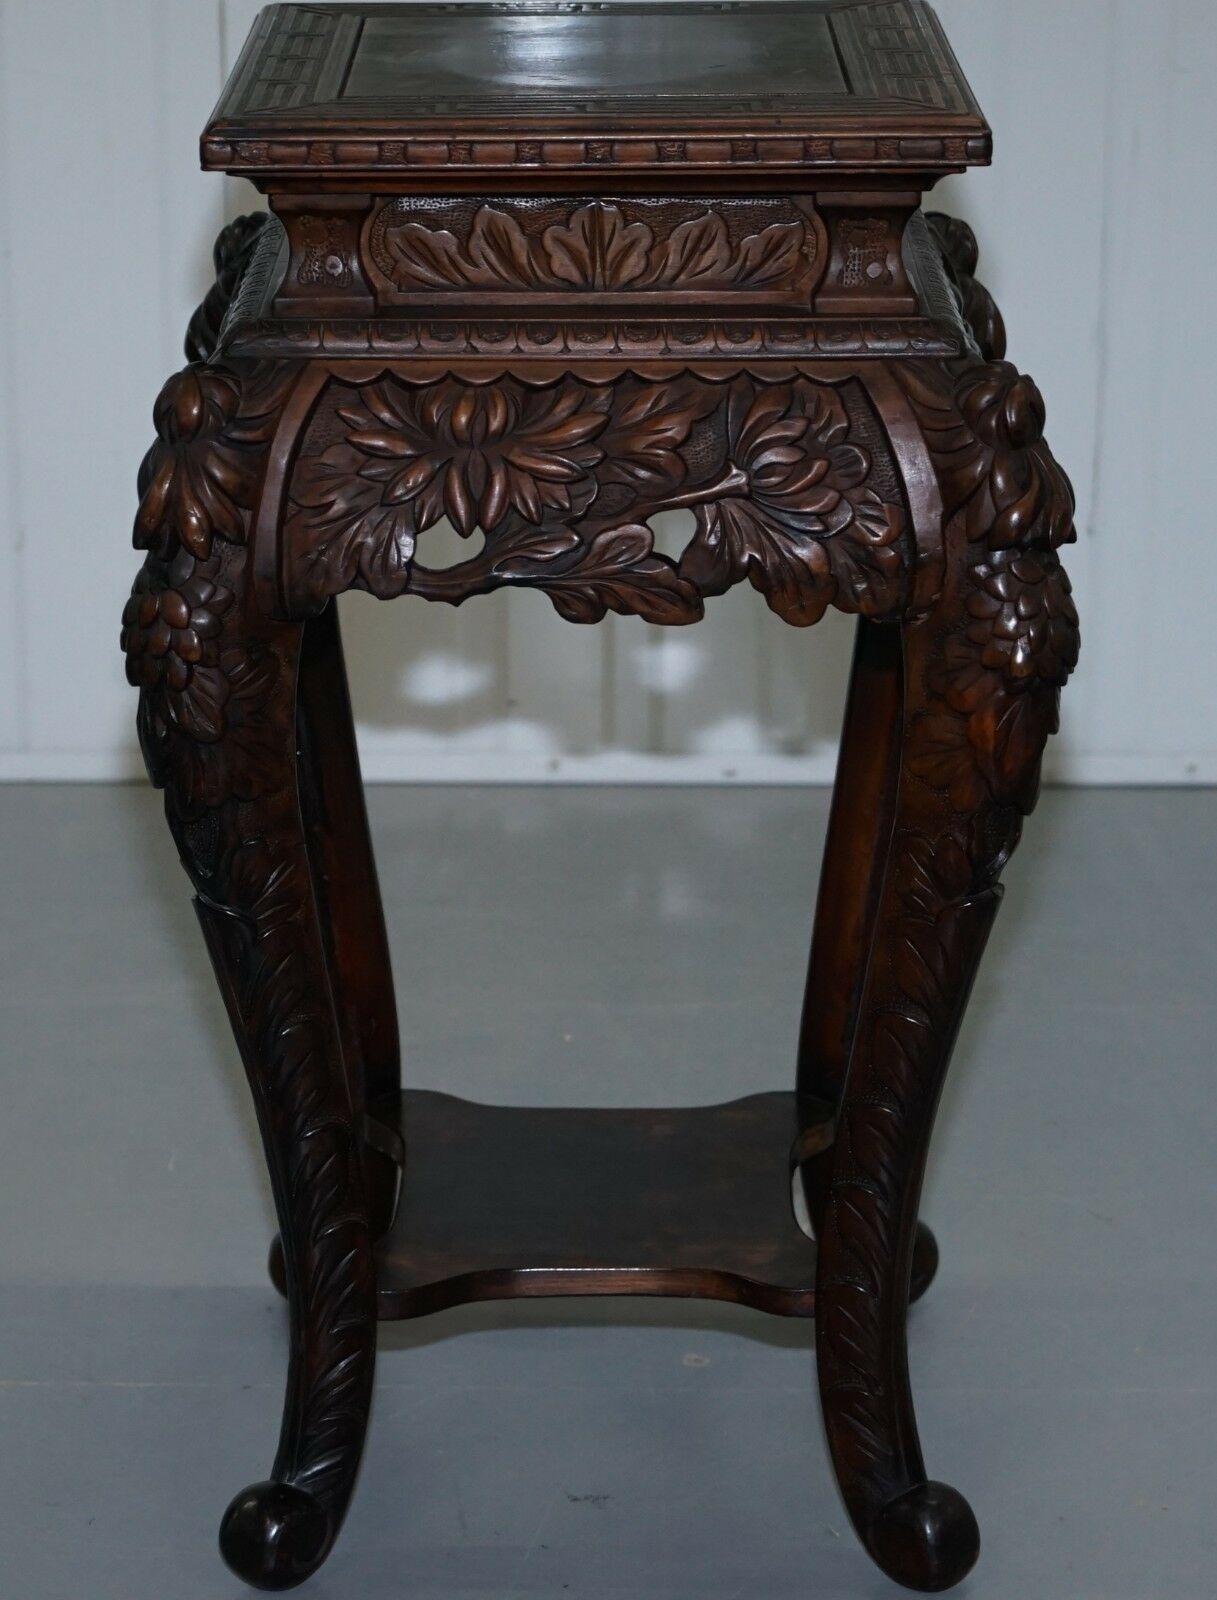 Chinese Export Rare 1880 Antique Hand Carved Wood Chinese Jardinière Stand Pots Busts Display